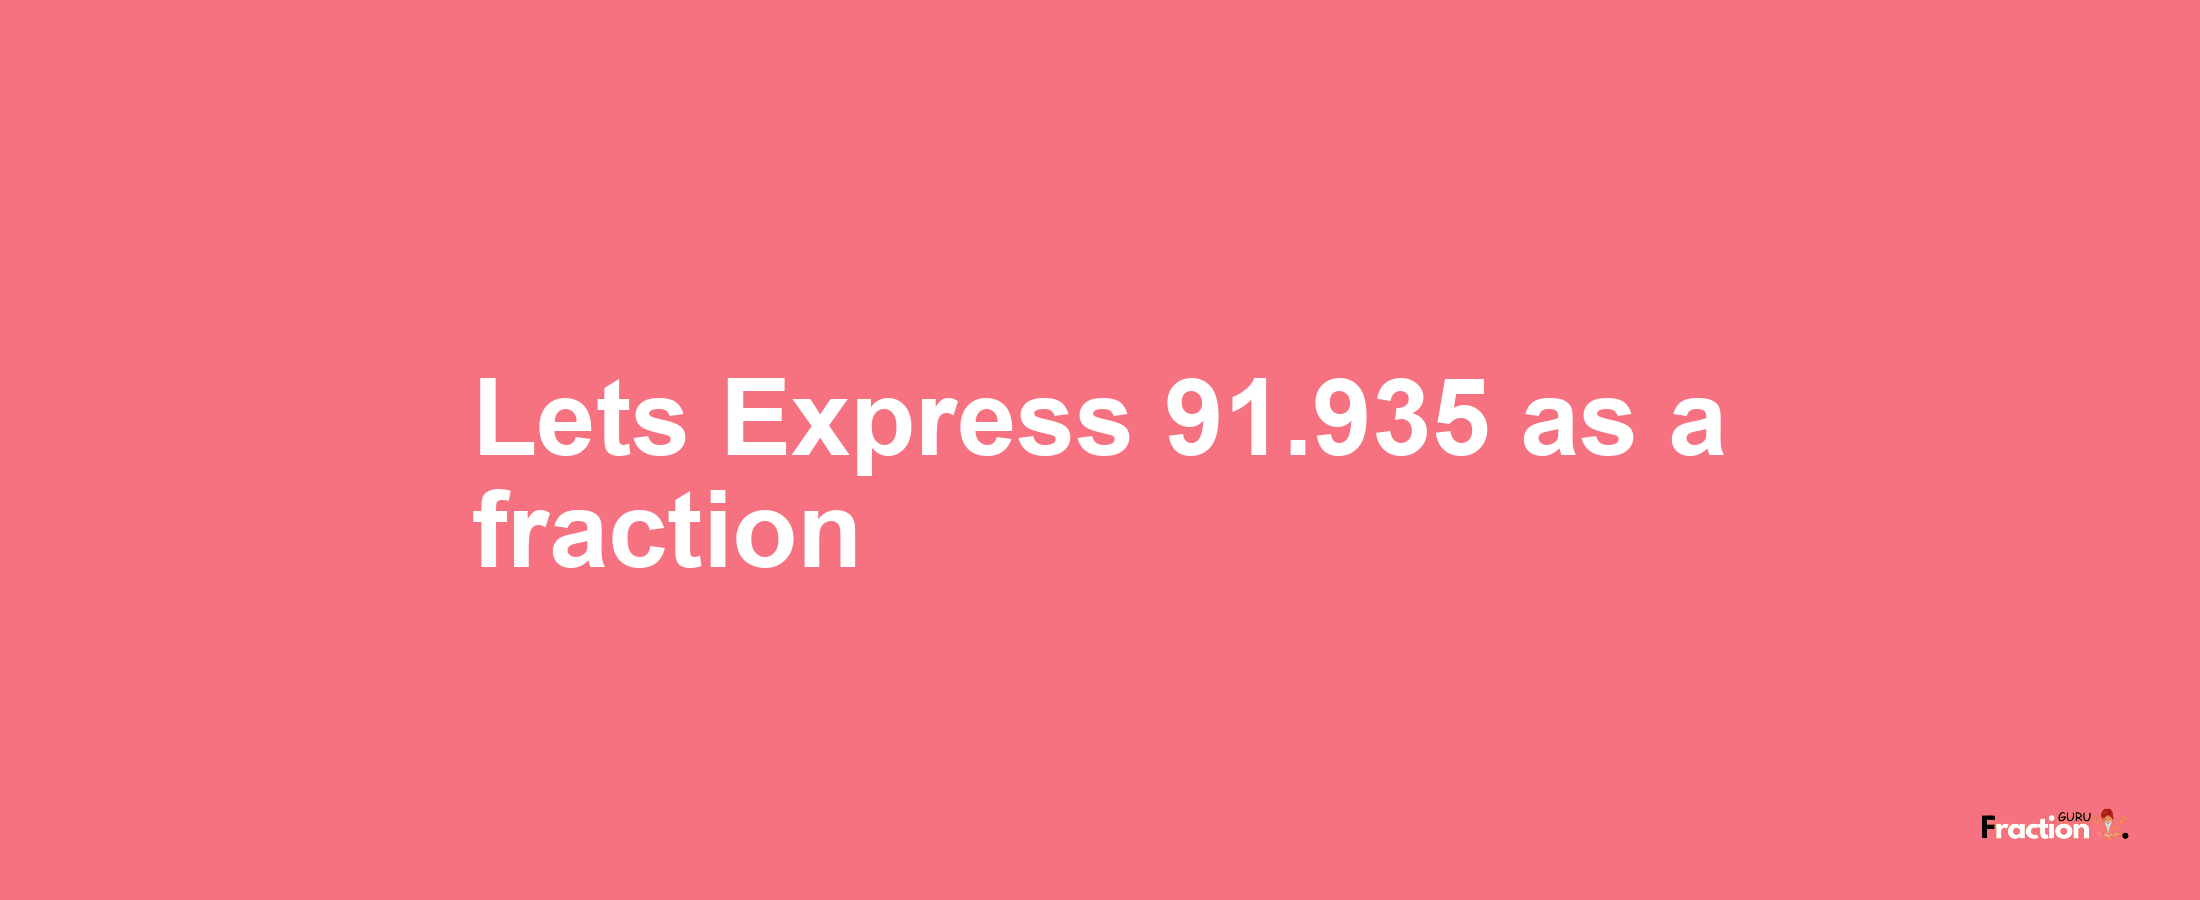 Lets Express 91.935 as afraction